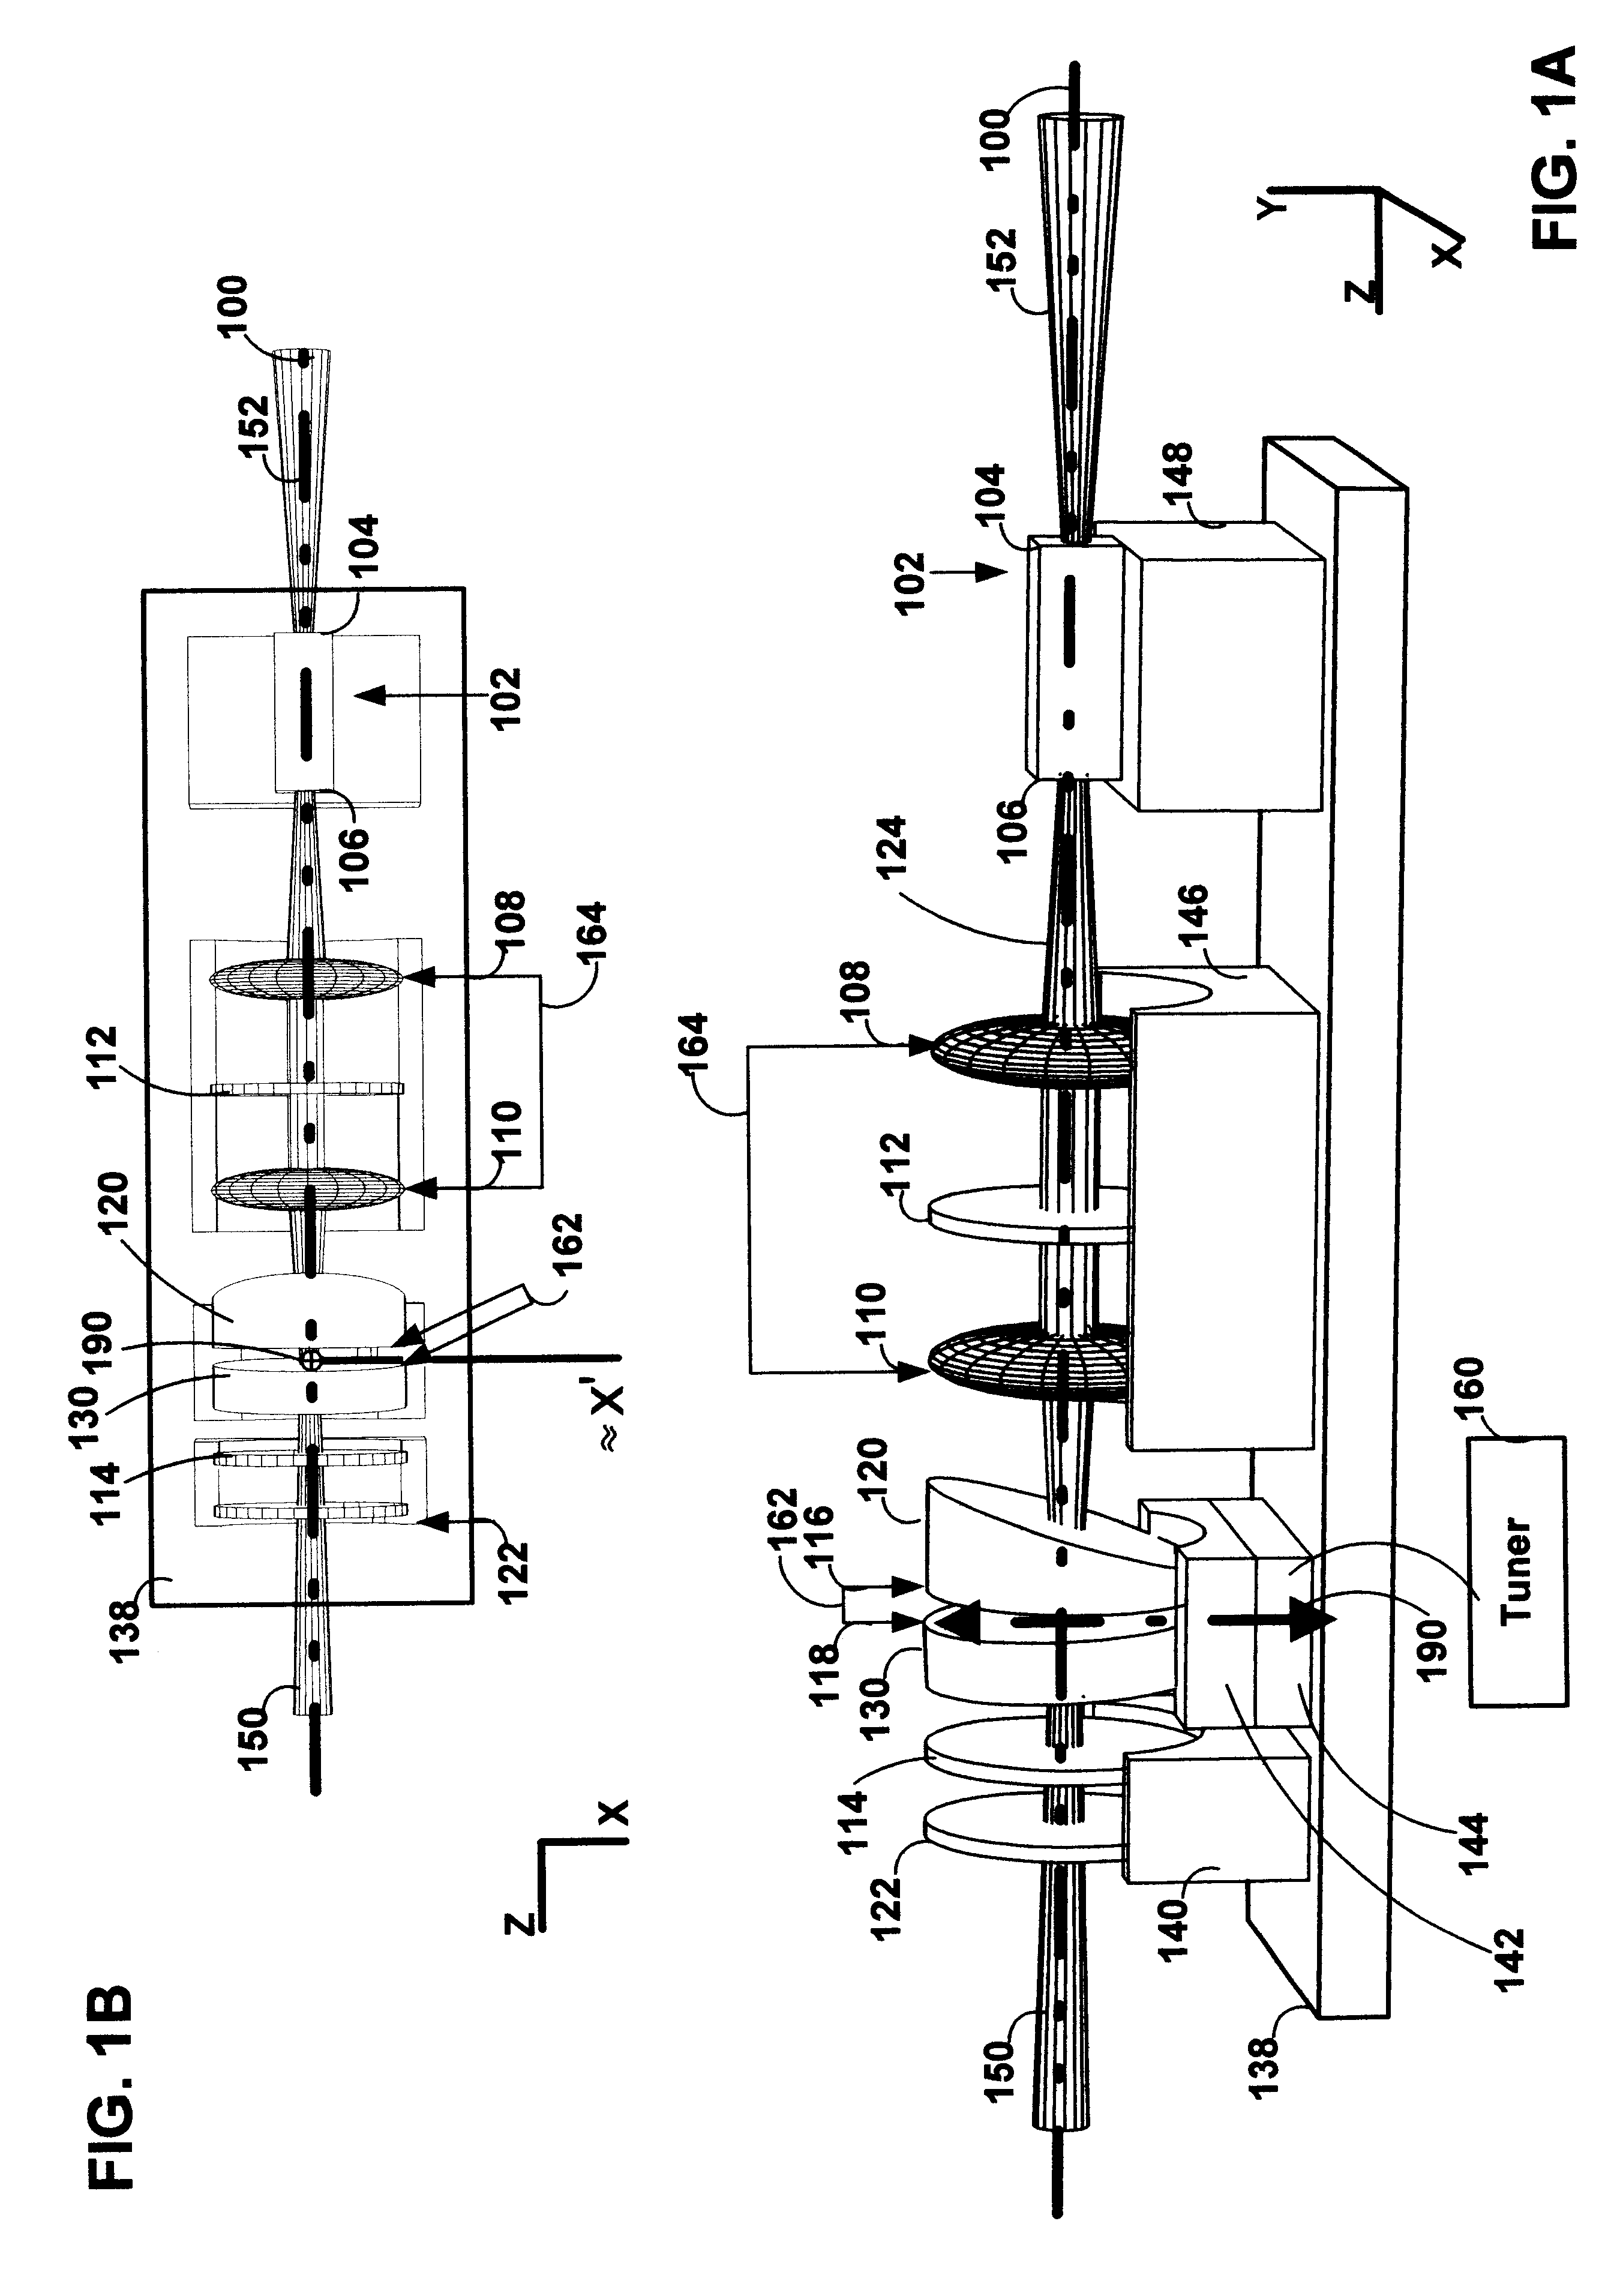 Continuously-tunable external cavity laser